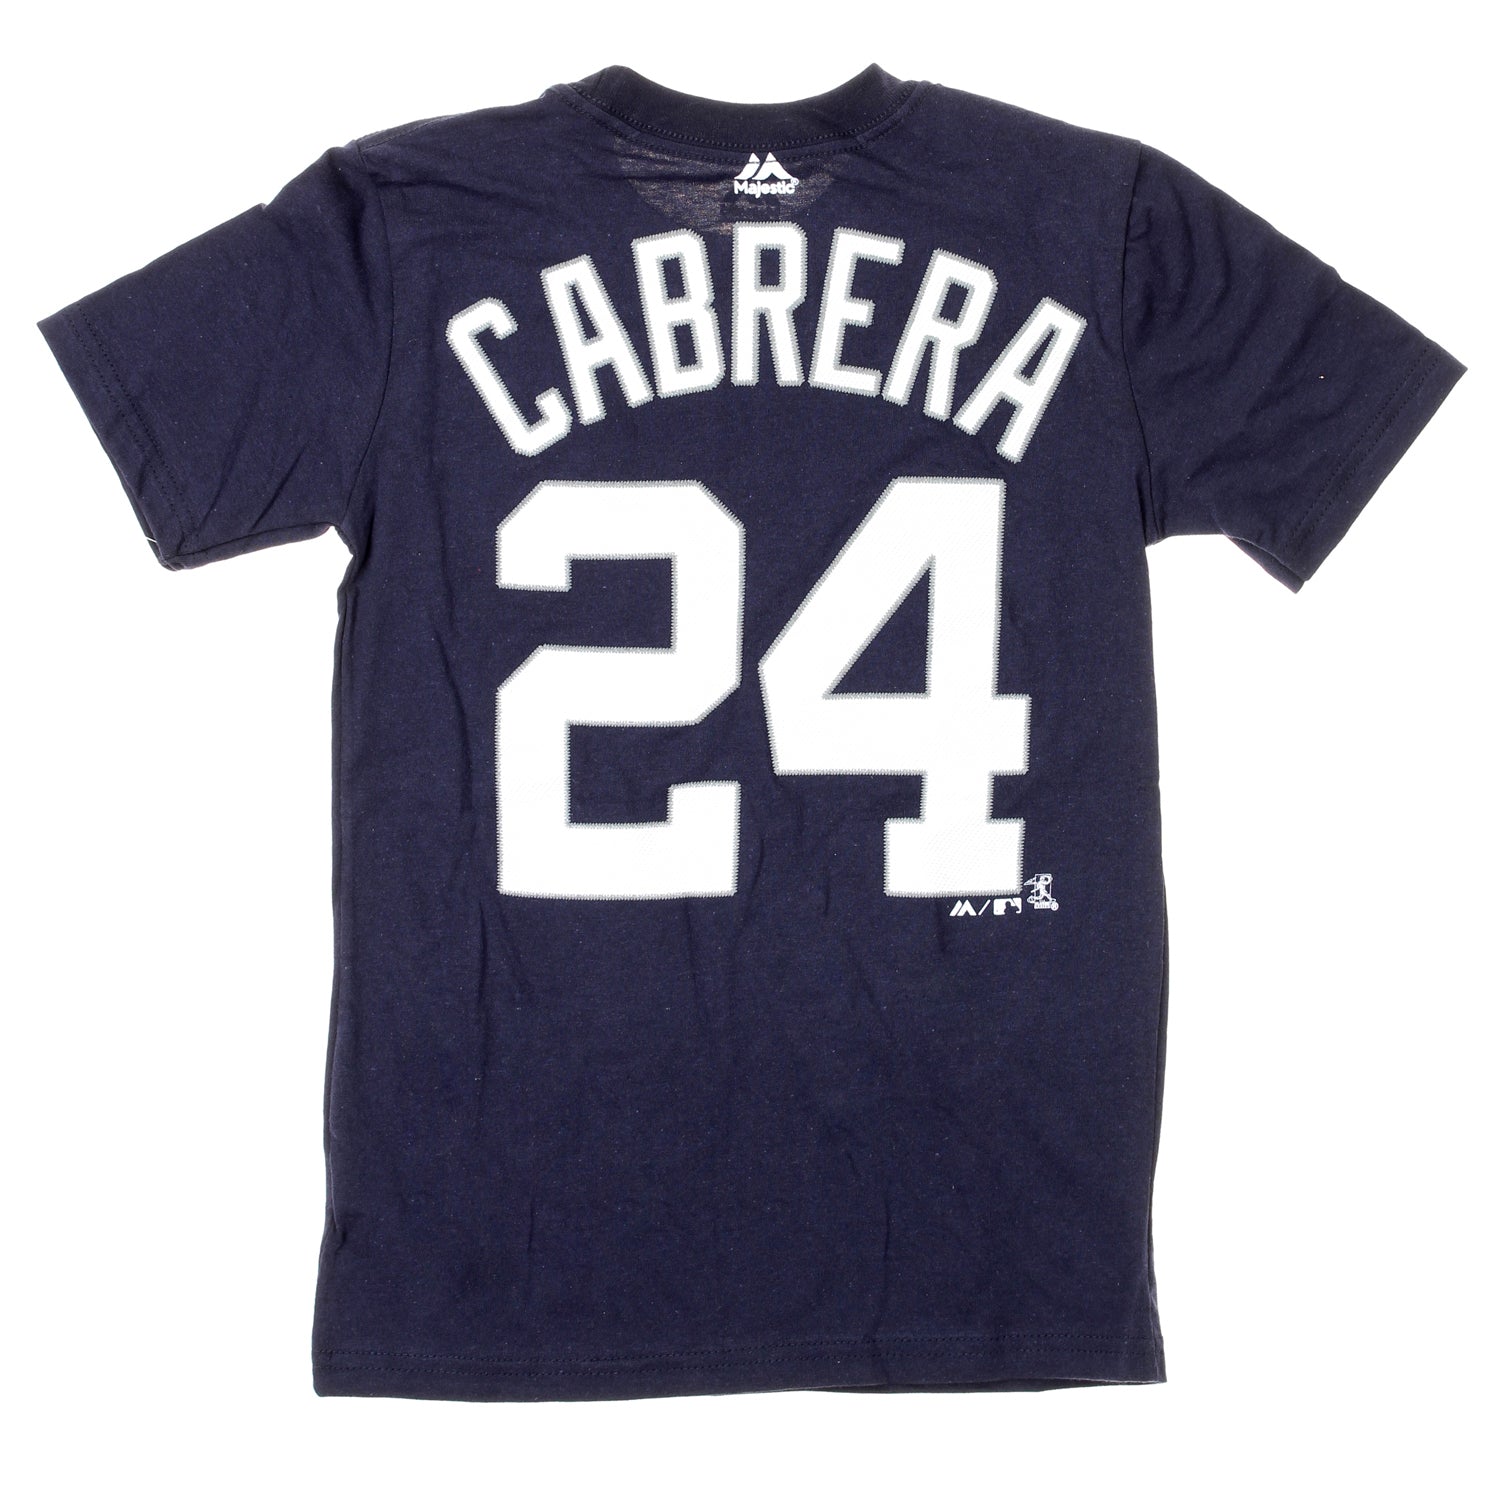 Adidas MLB Detroit Tigers Miguel Cabrera #24 Jersey Size Youth XL (18-20).